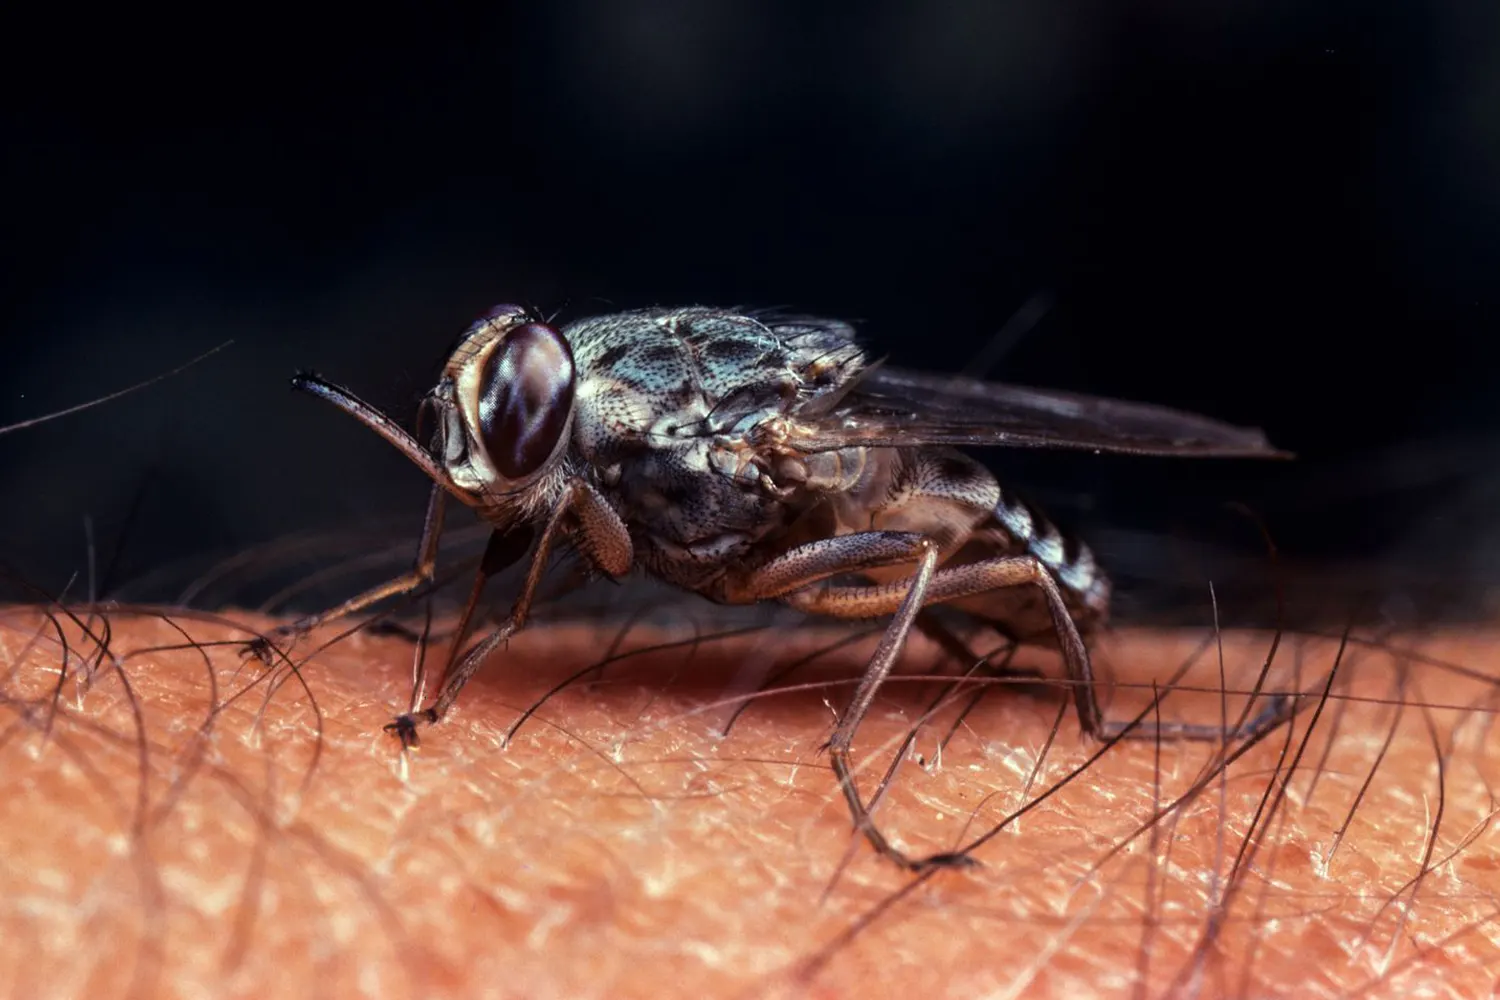 Insect Bite from Tsetse fly